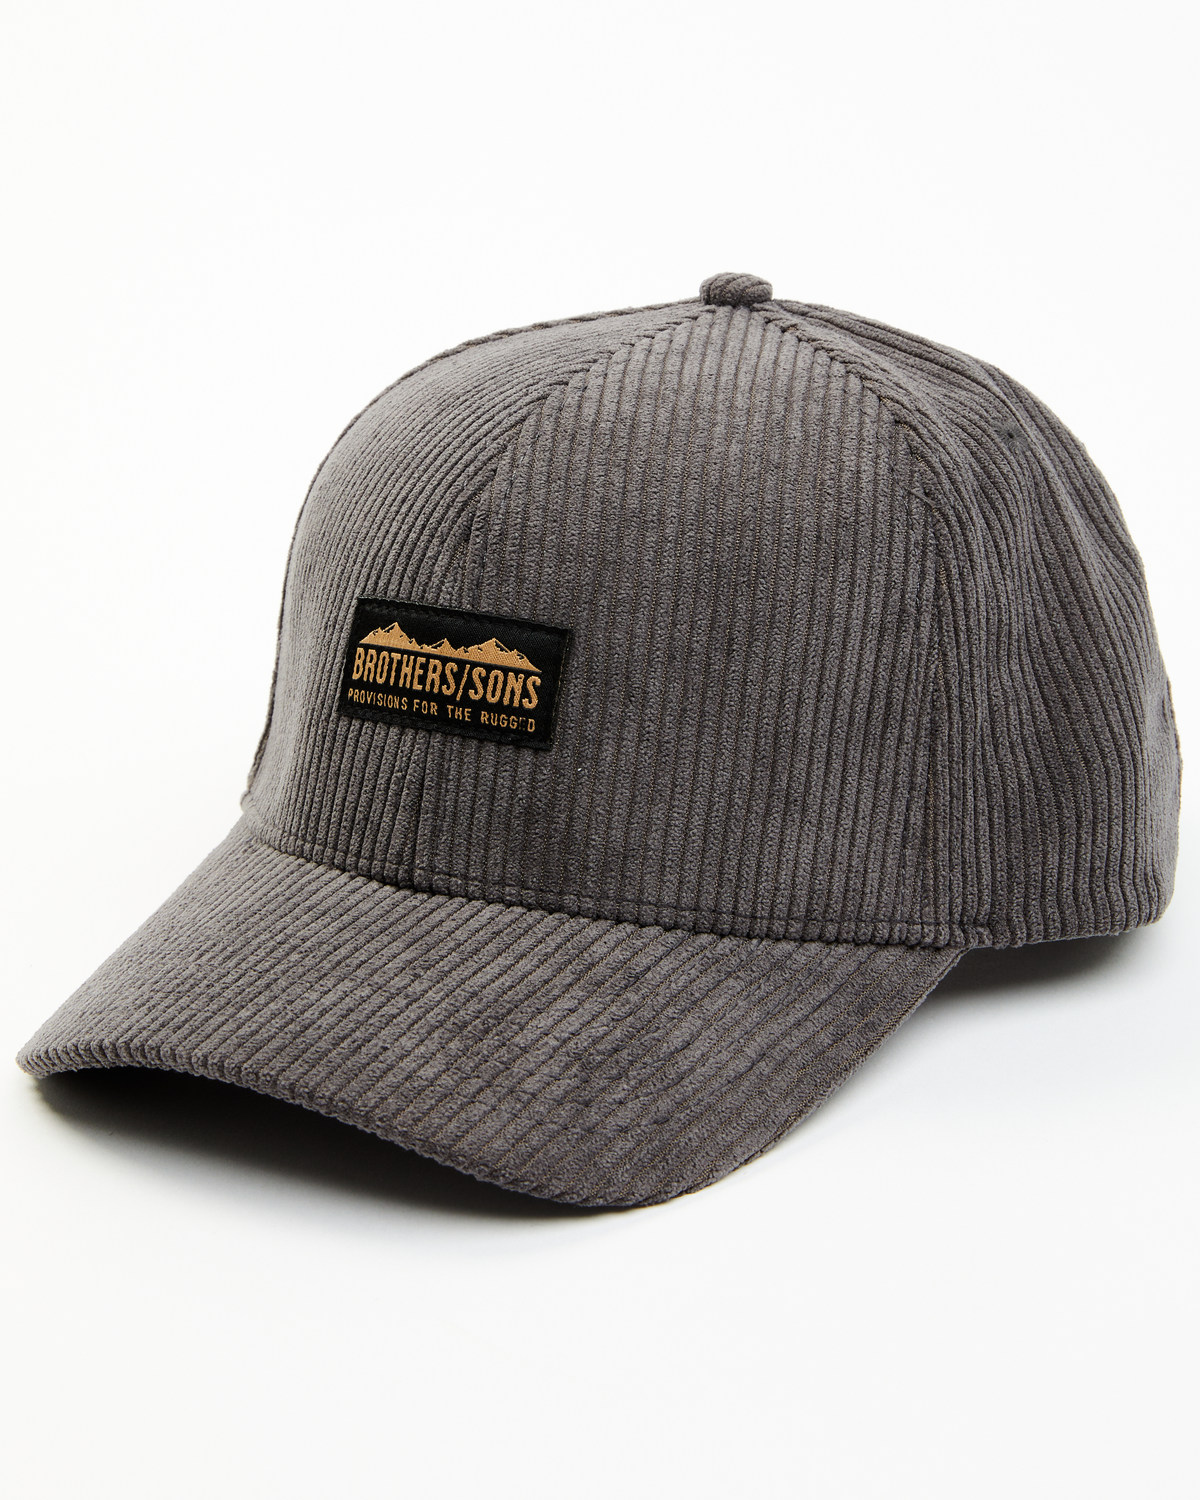 Brother and Sons Men's Corduroy Ball Cap